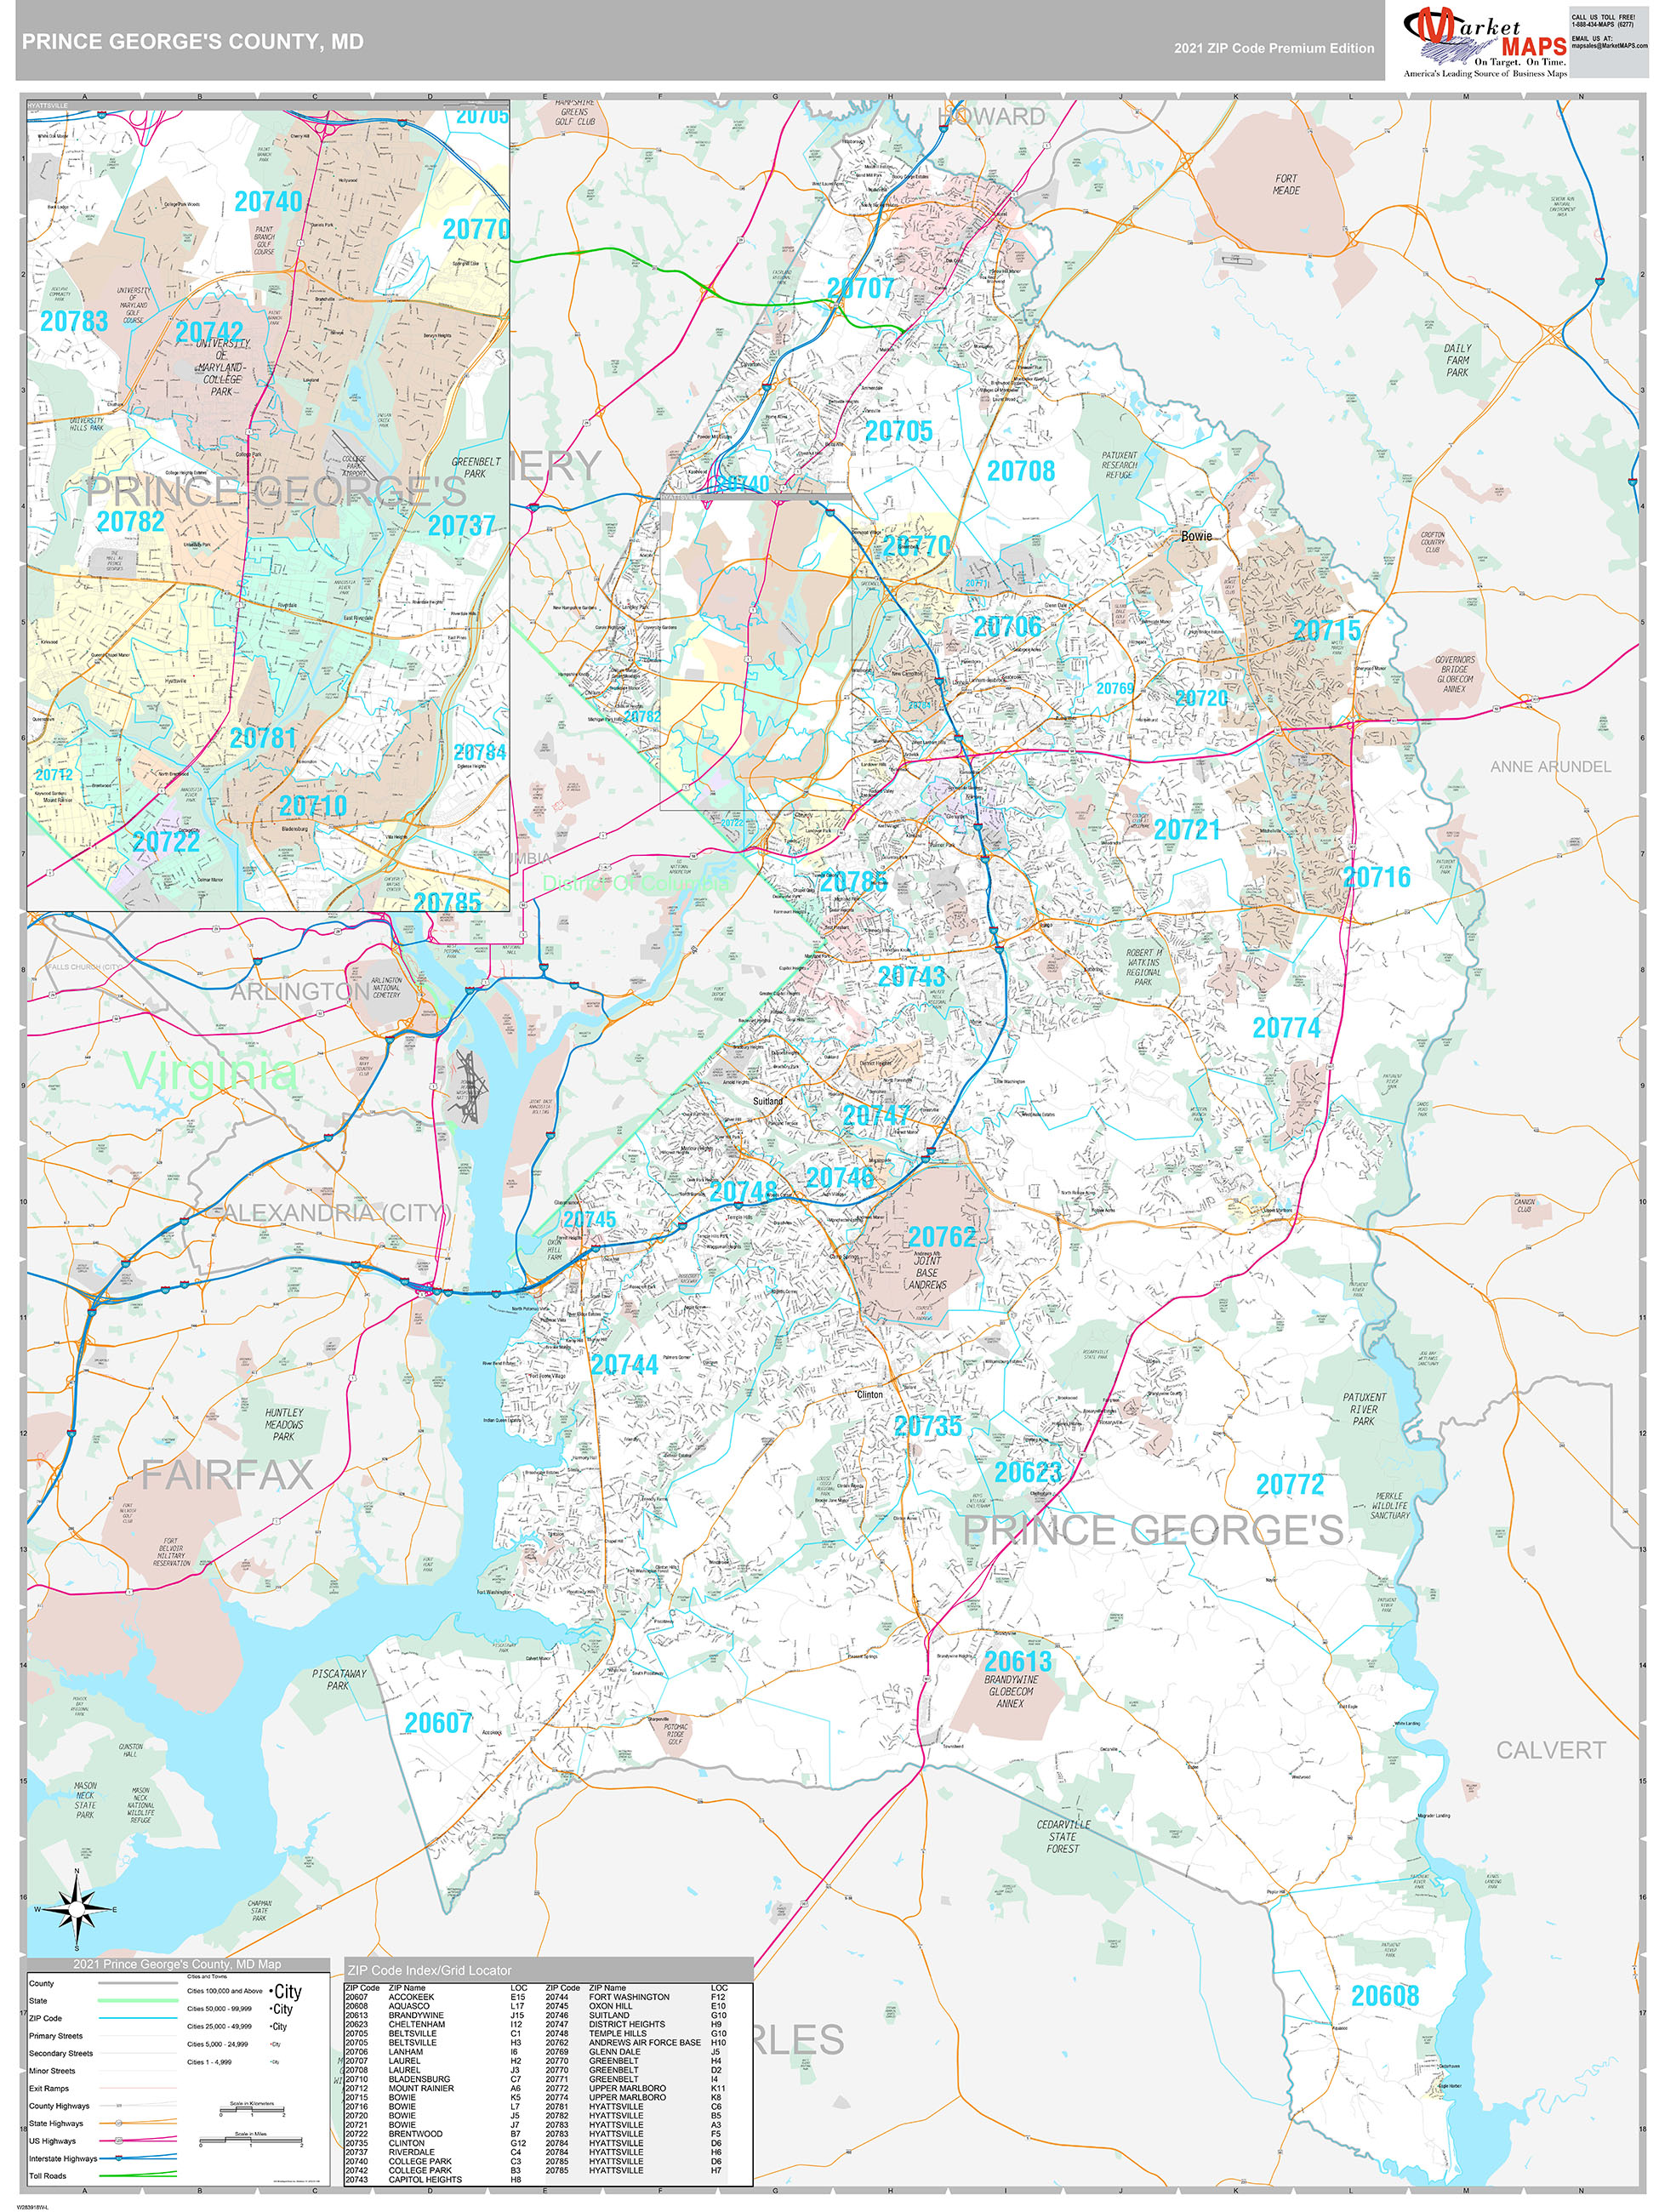 Prince George #39 s County MD Wall Map Premium Style by MarketMAPS